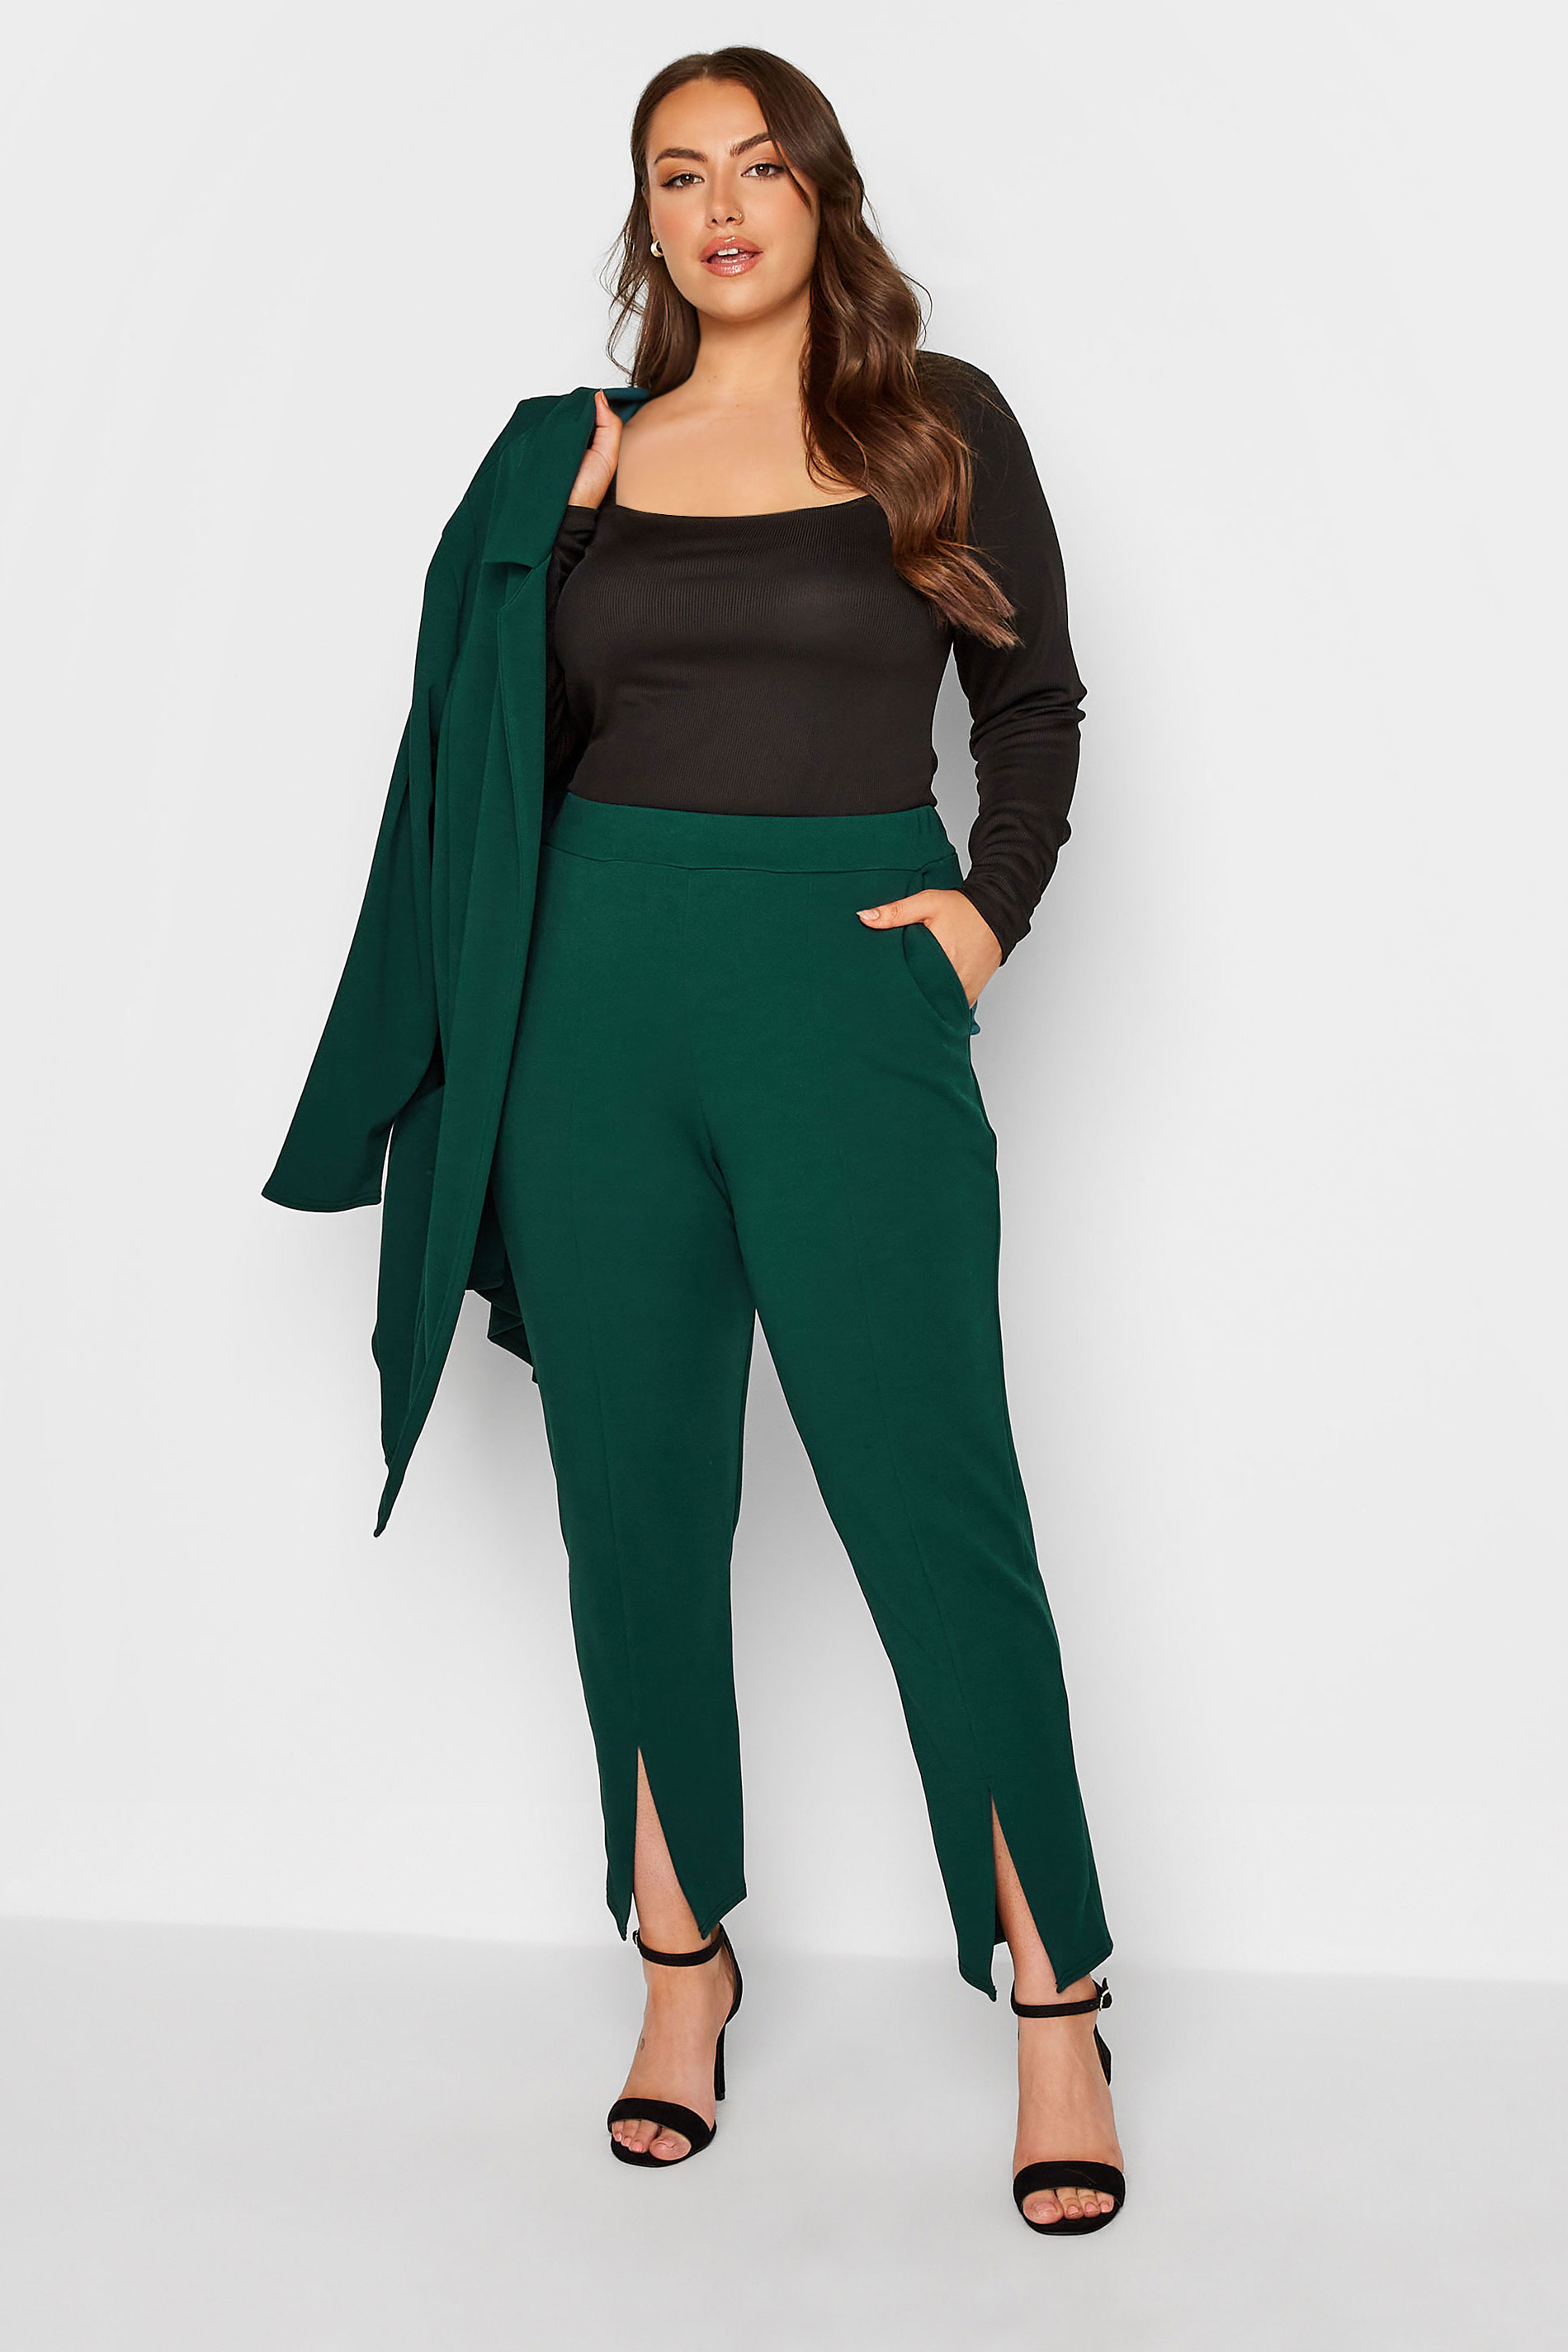 Brushed Cotton Pleated Trousers  Forest Green  The Anthology